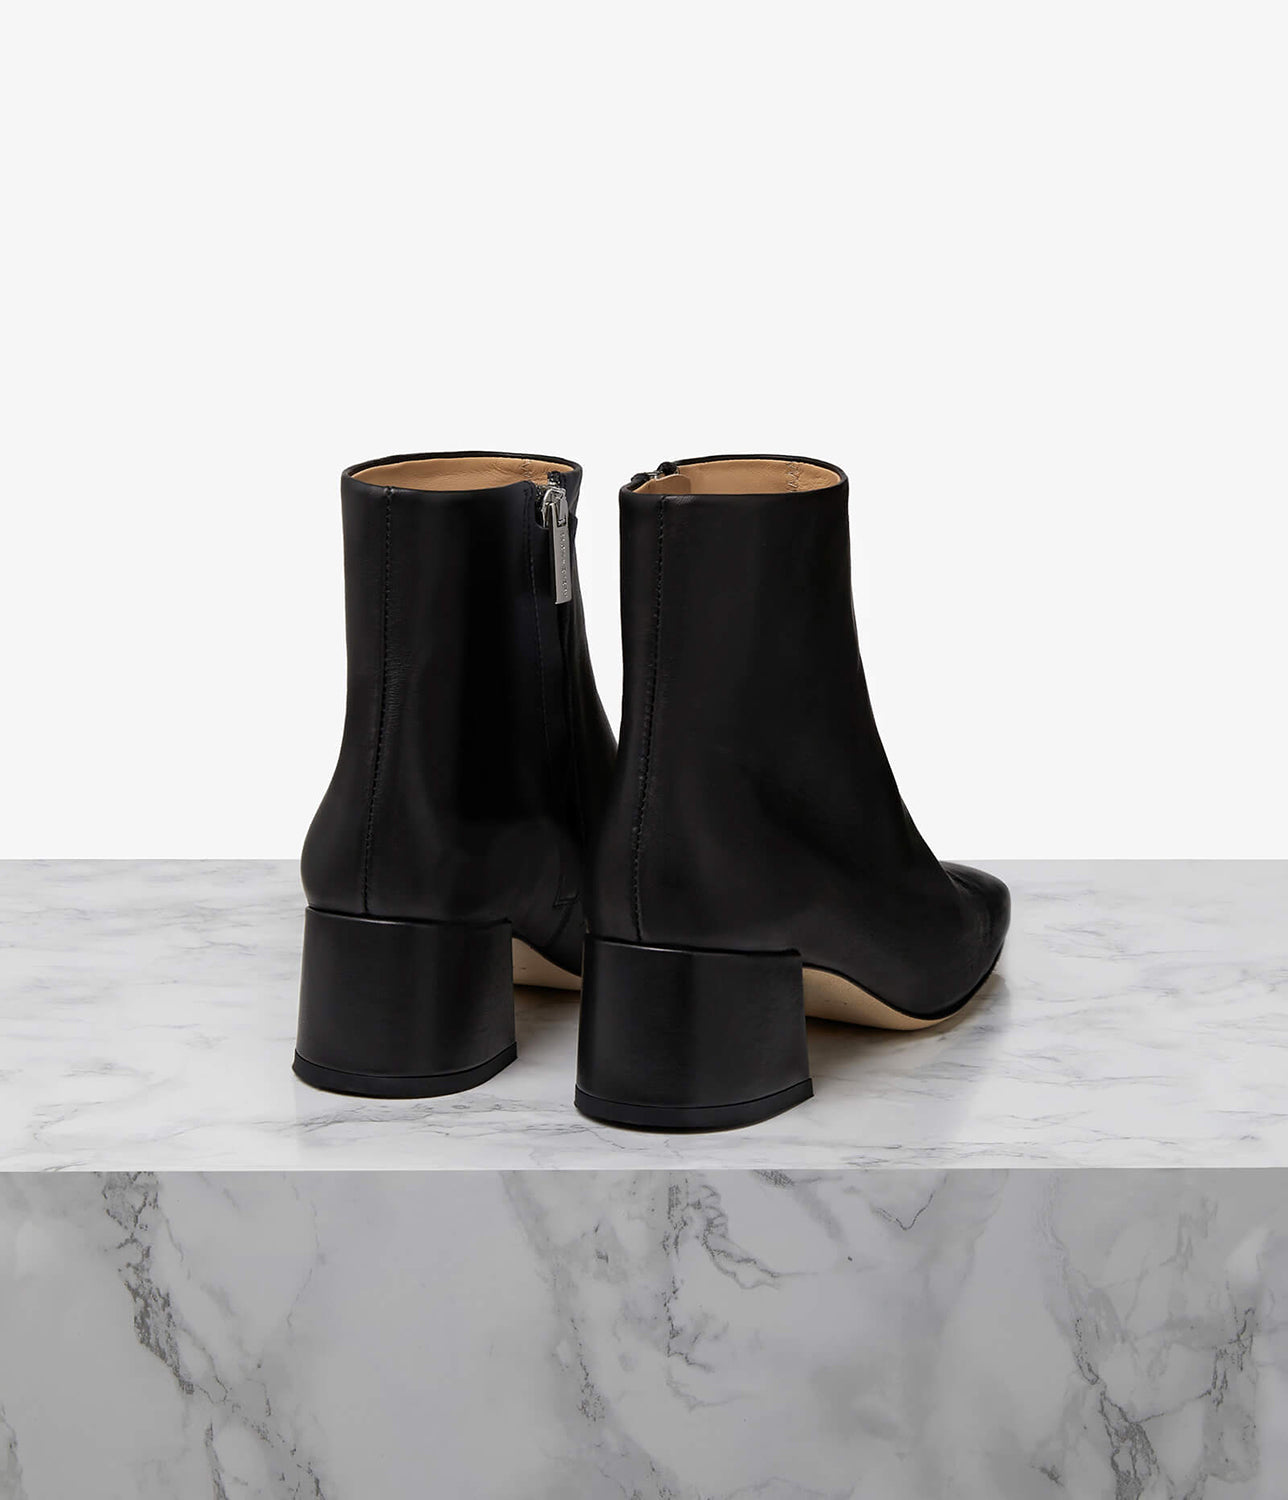 Designed to elevate the everyday, our Parade boot is crafted to a sleek, sculptural silhouette. Choose from a 50mm sculpted or block heel for the perfect amount of lift with ample arch support. Our perfectly placed zip runs all the way down to the arch for easy slip-on, regardless of foot type, while the superior leather options mould to your foot for the perfect fit. Let the modern square toe ground all your daytime looks.